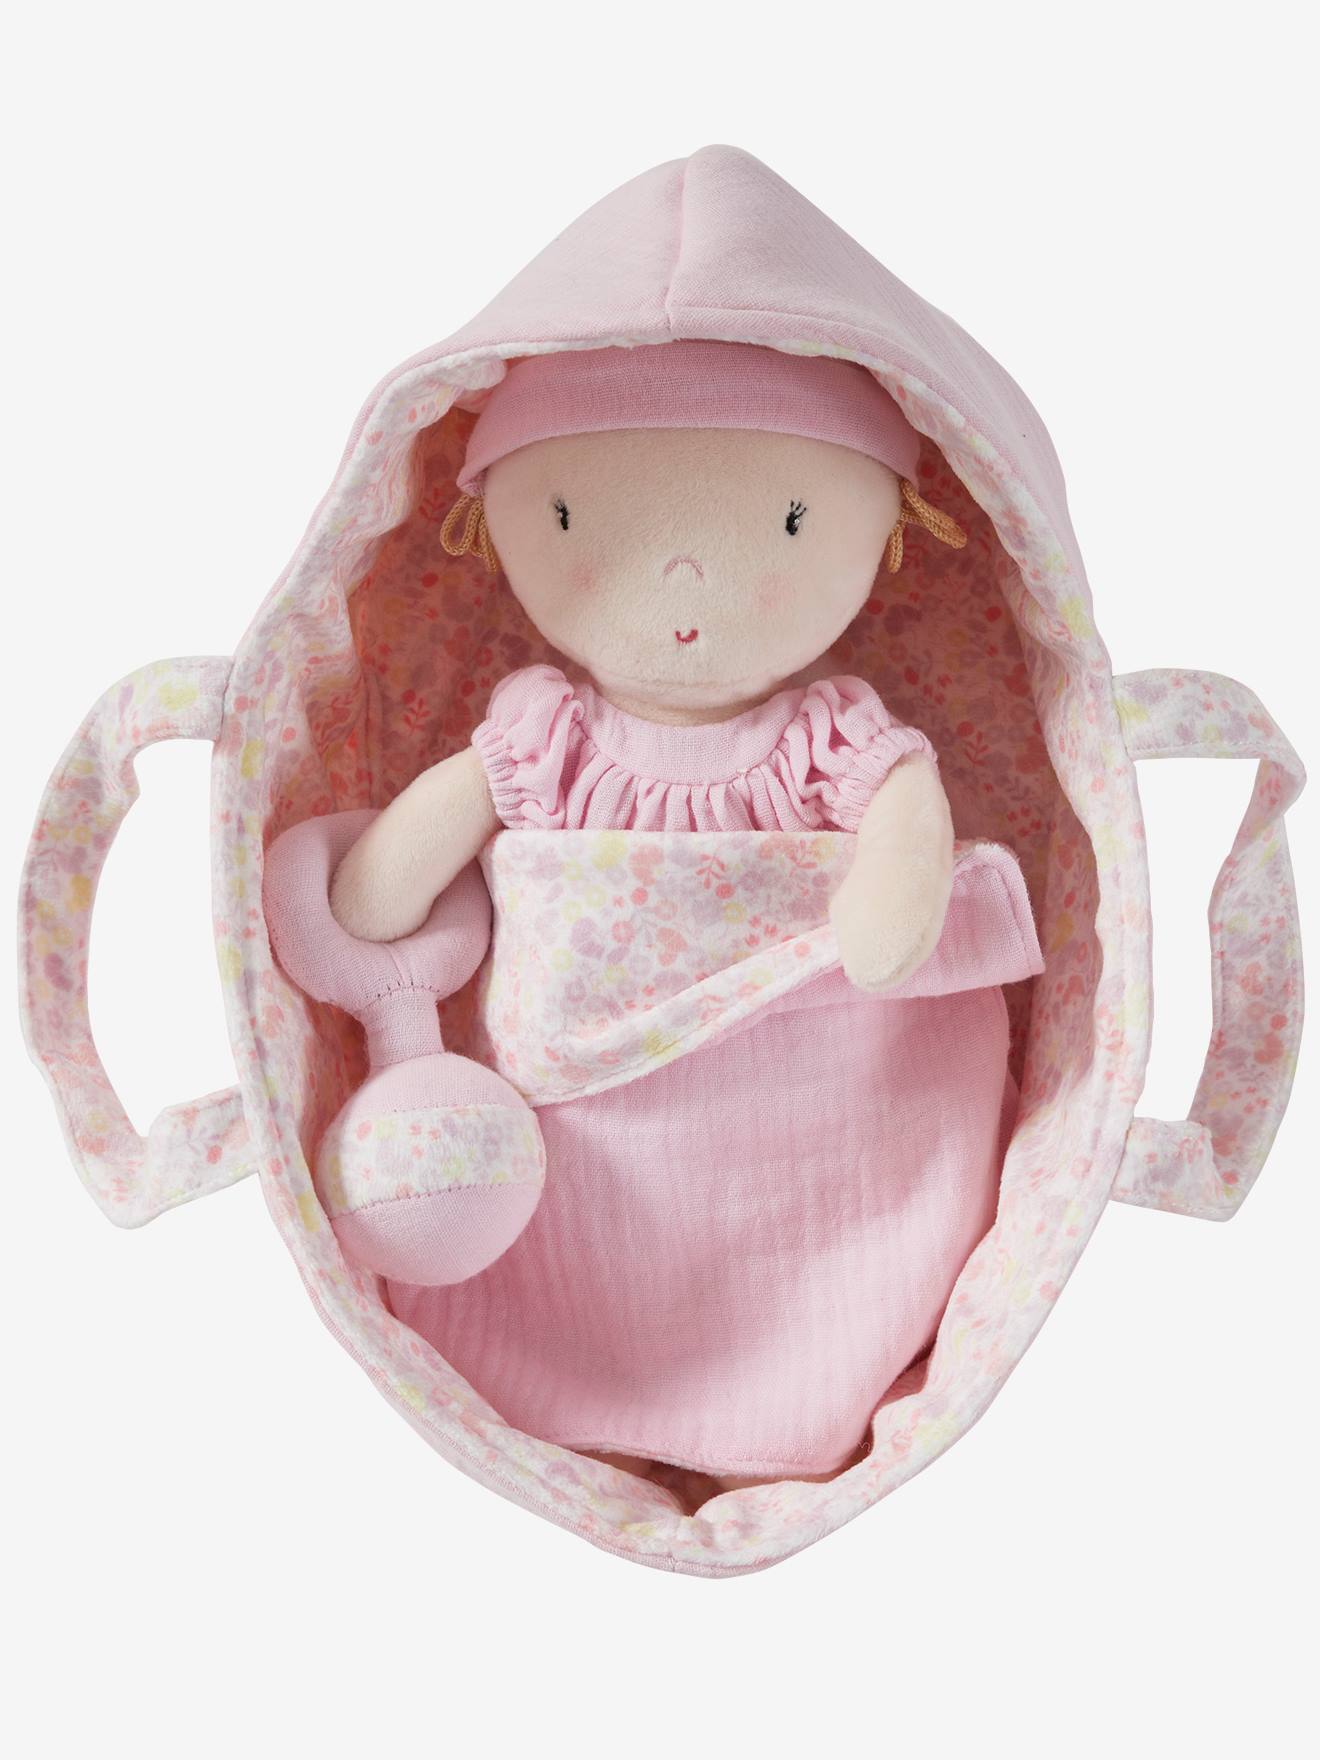 baby doll carry bed